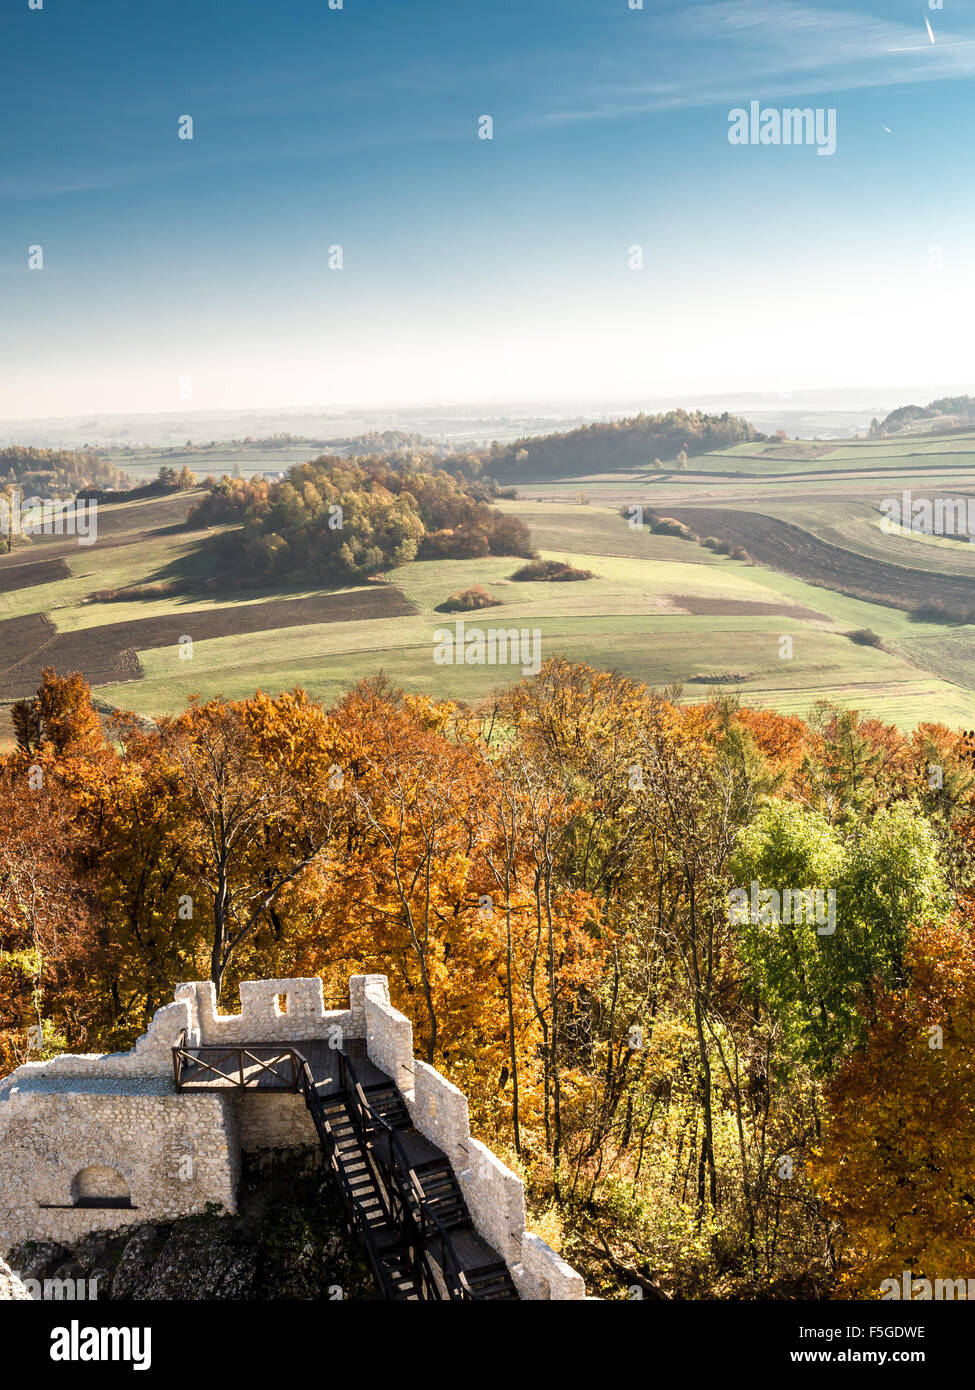 Panoramic view of Krakow-Czestochowa Upland seen from the Ruins of medieval castle Smolen, Poland Stock Photo